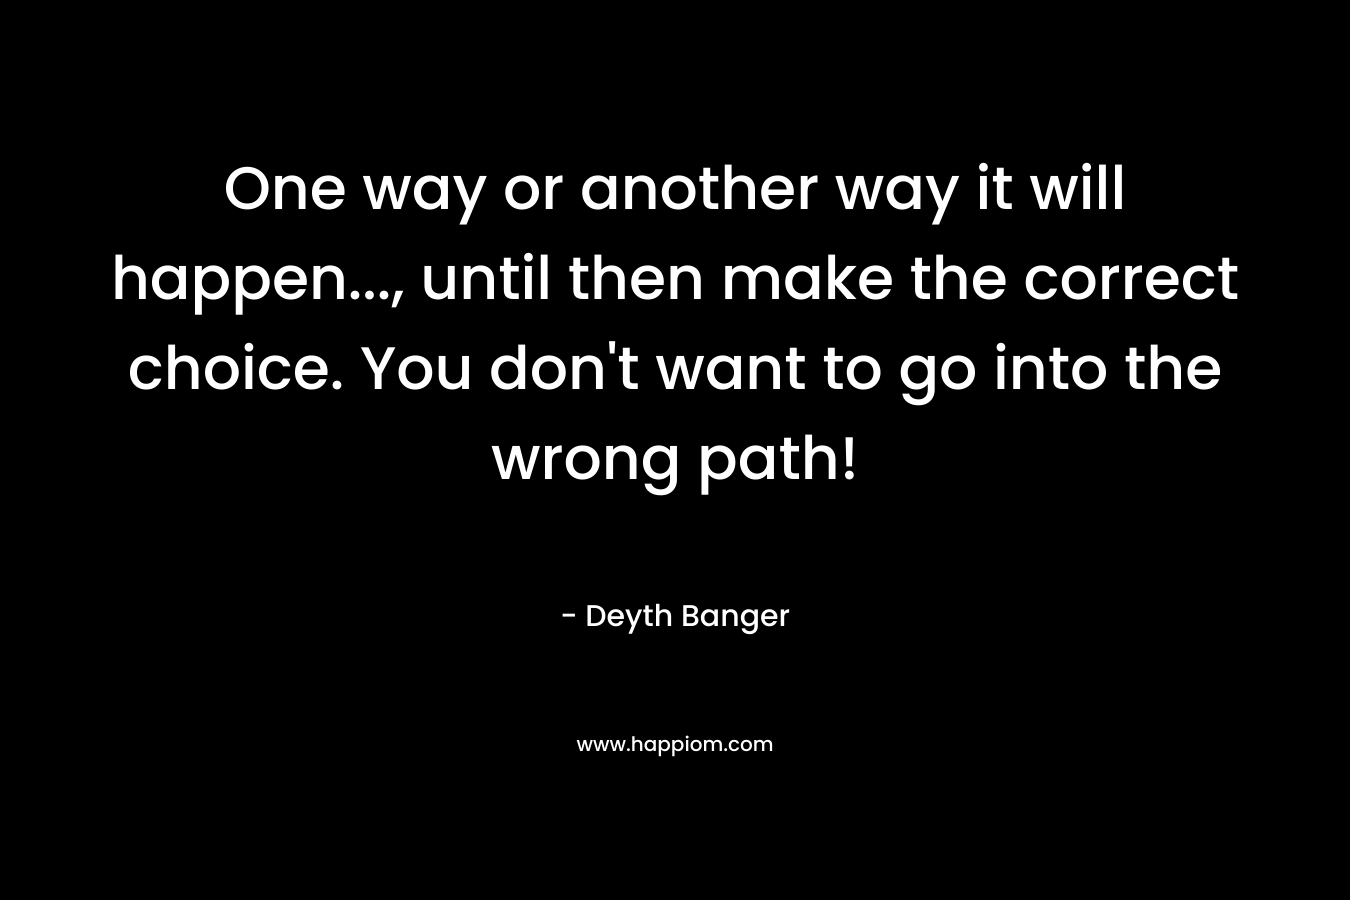 One way or another way it will happen…, until then make the correct choice. You don’t want to go into the wrong path! – Deyth Banger